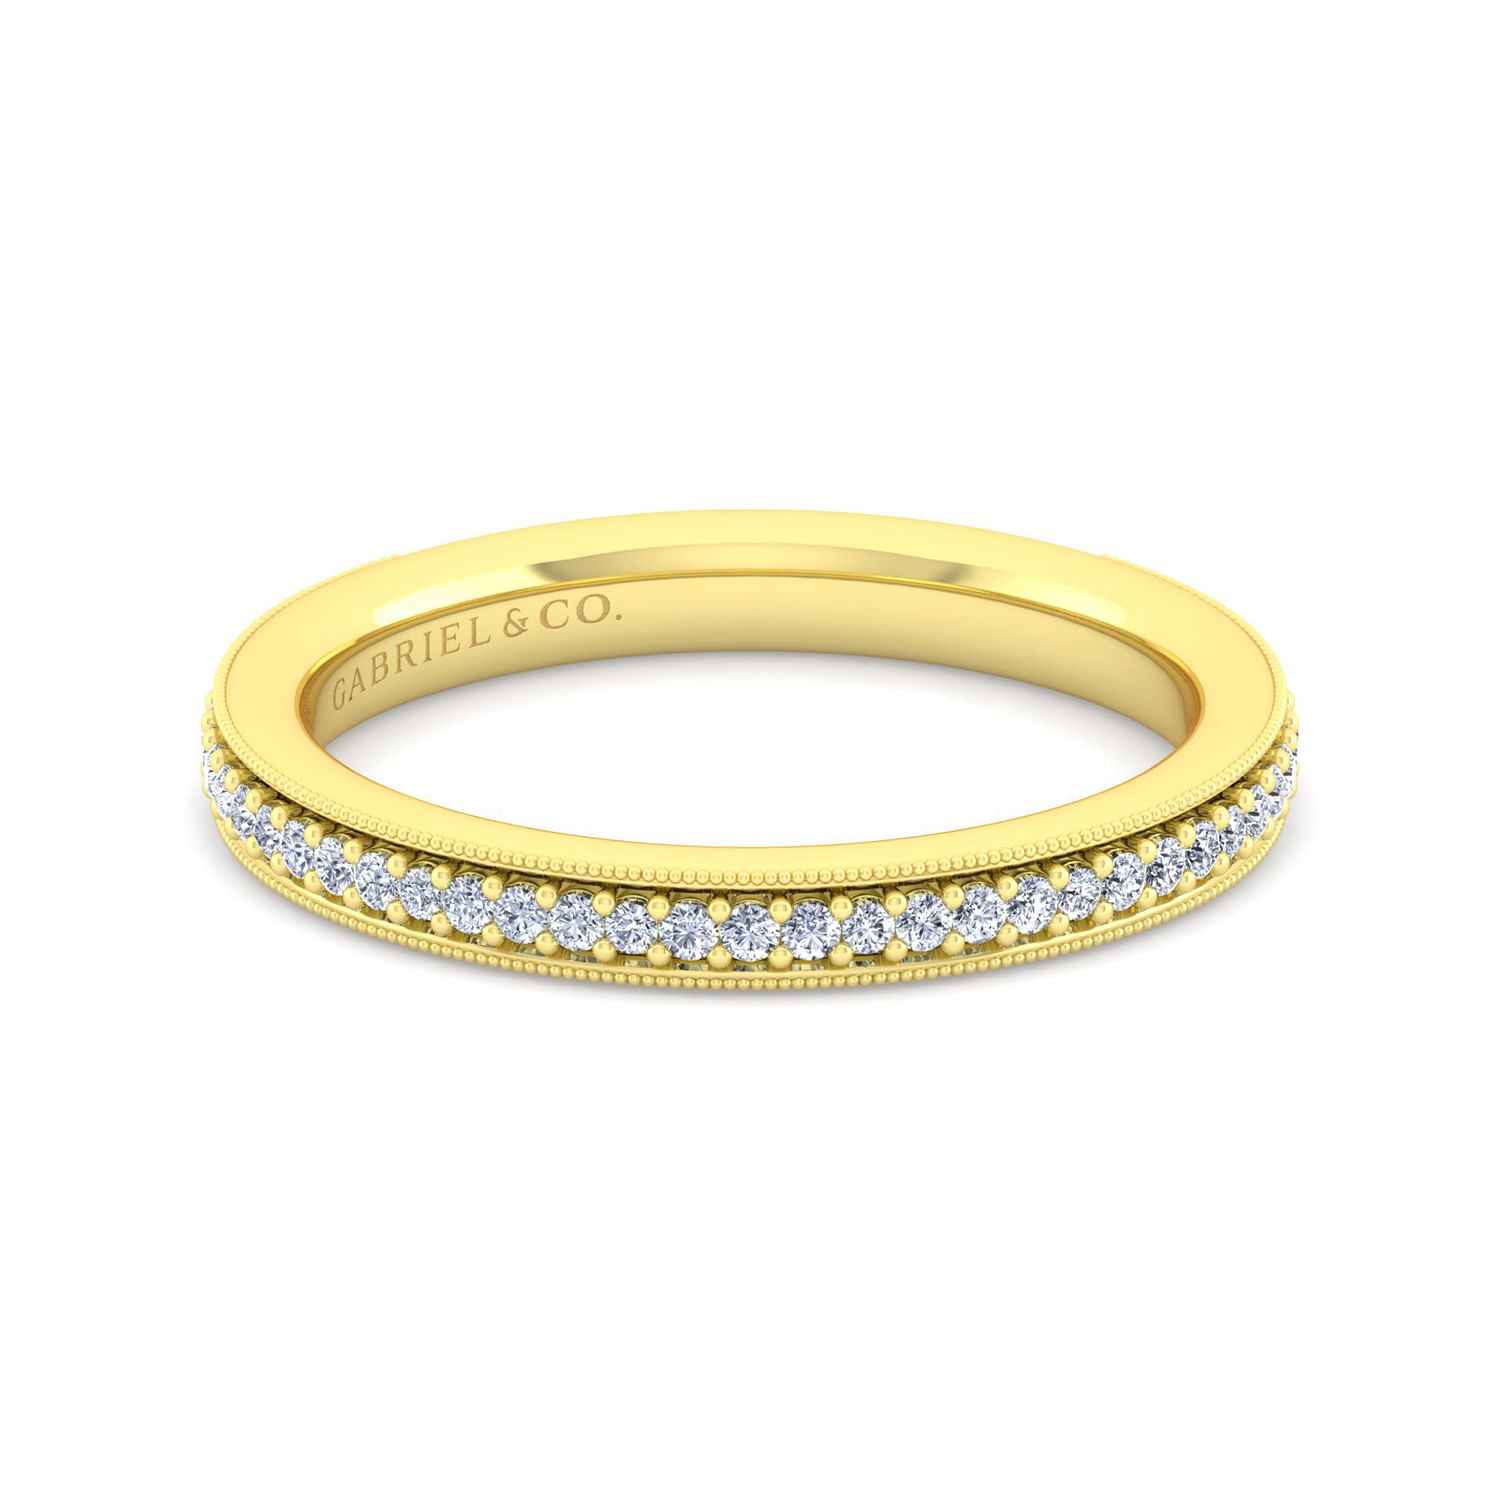 14K Yellow Gold Channel Prong Diamond Anniversary Band with Milgrain